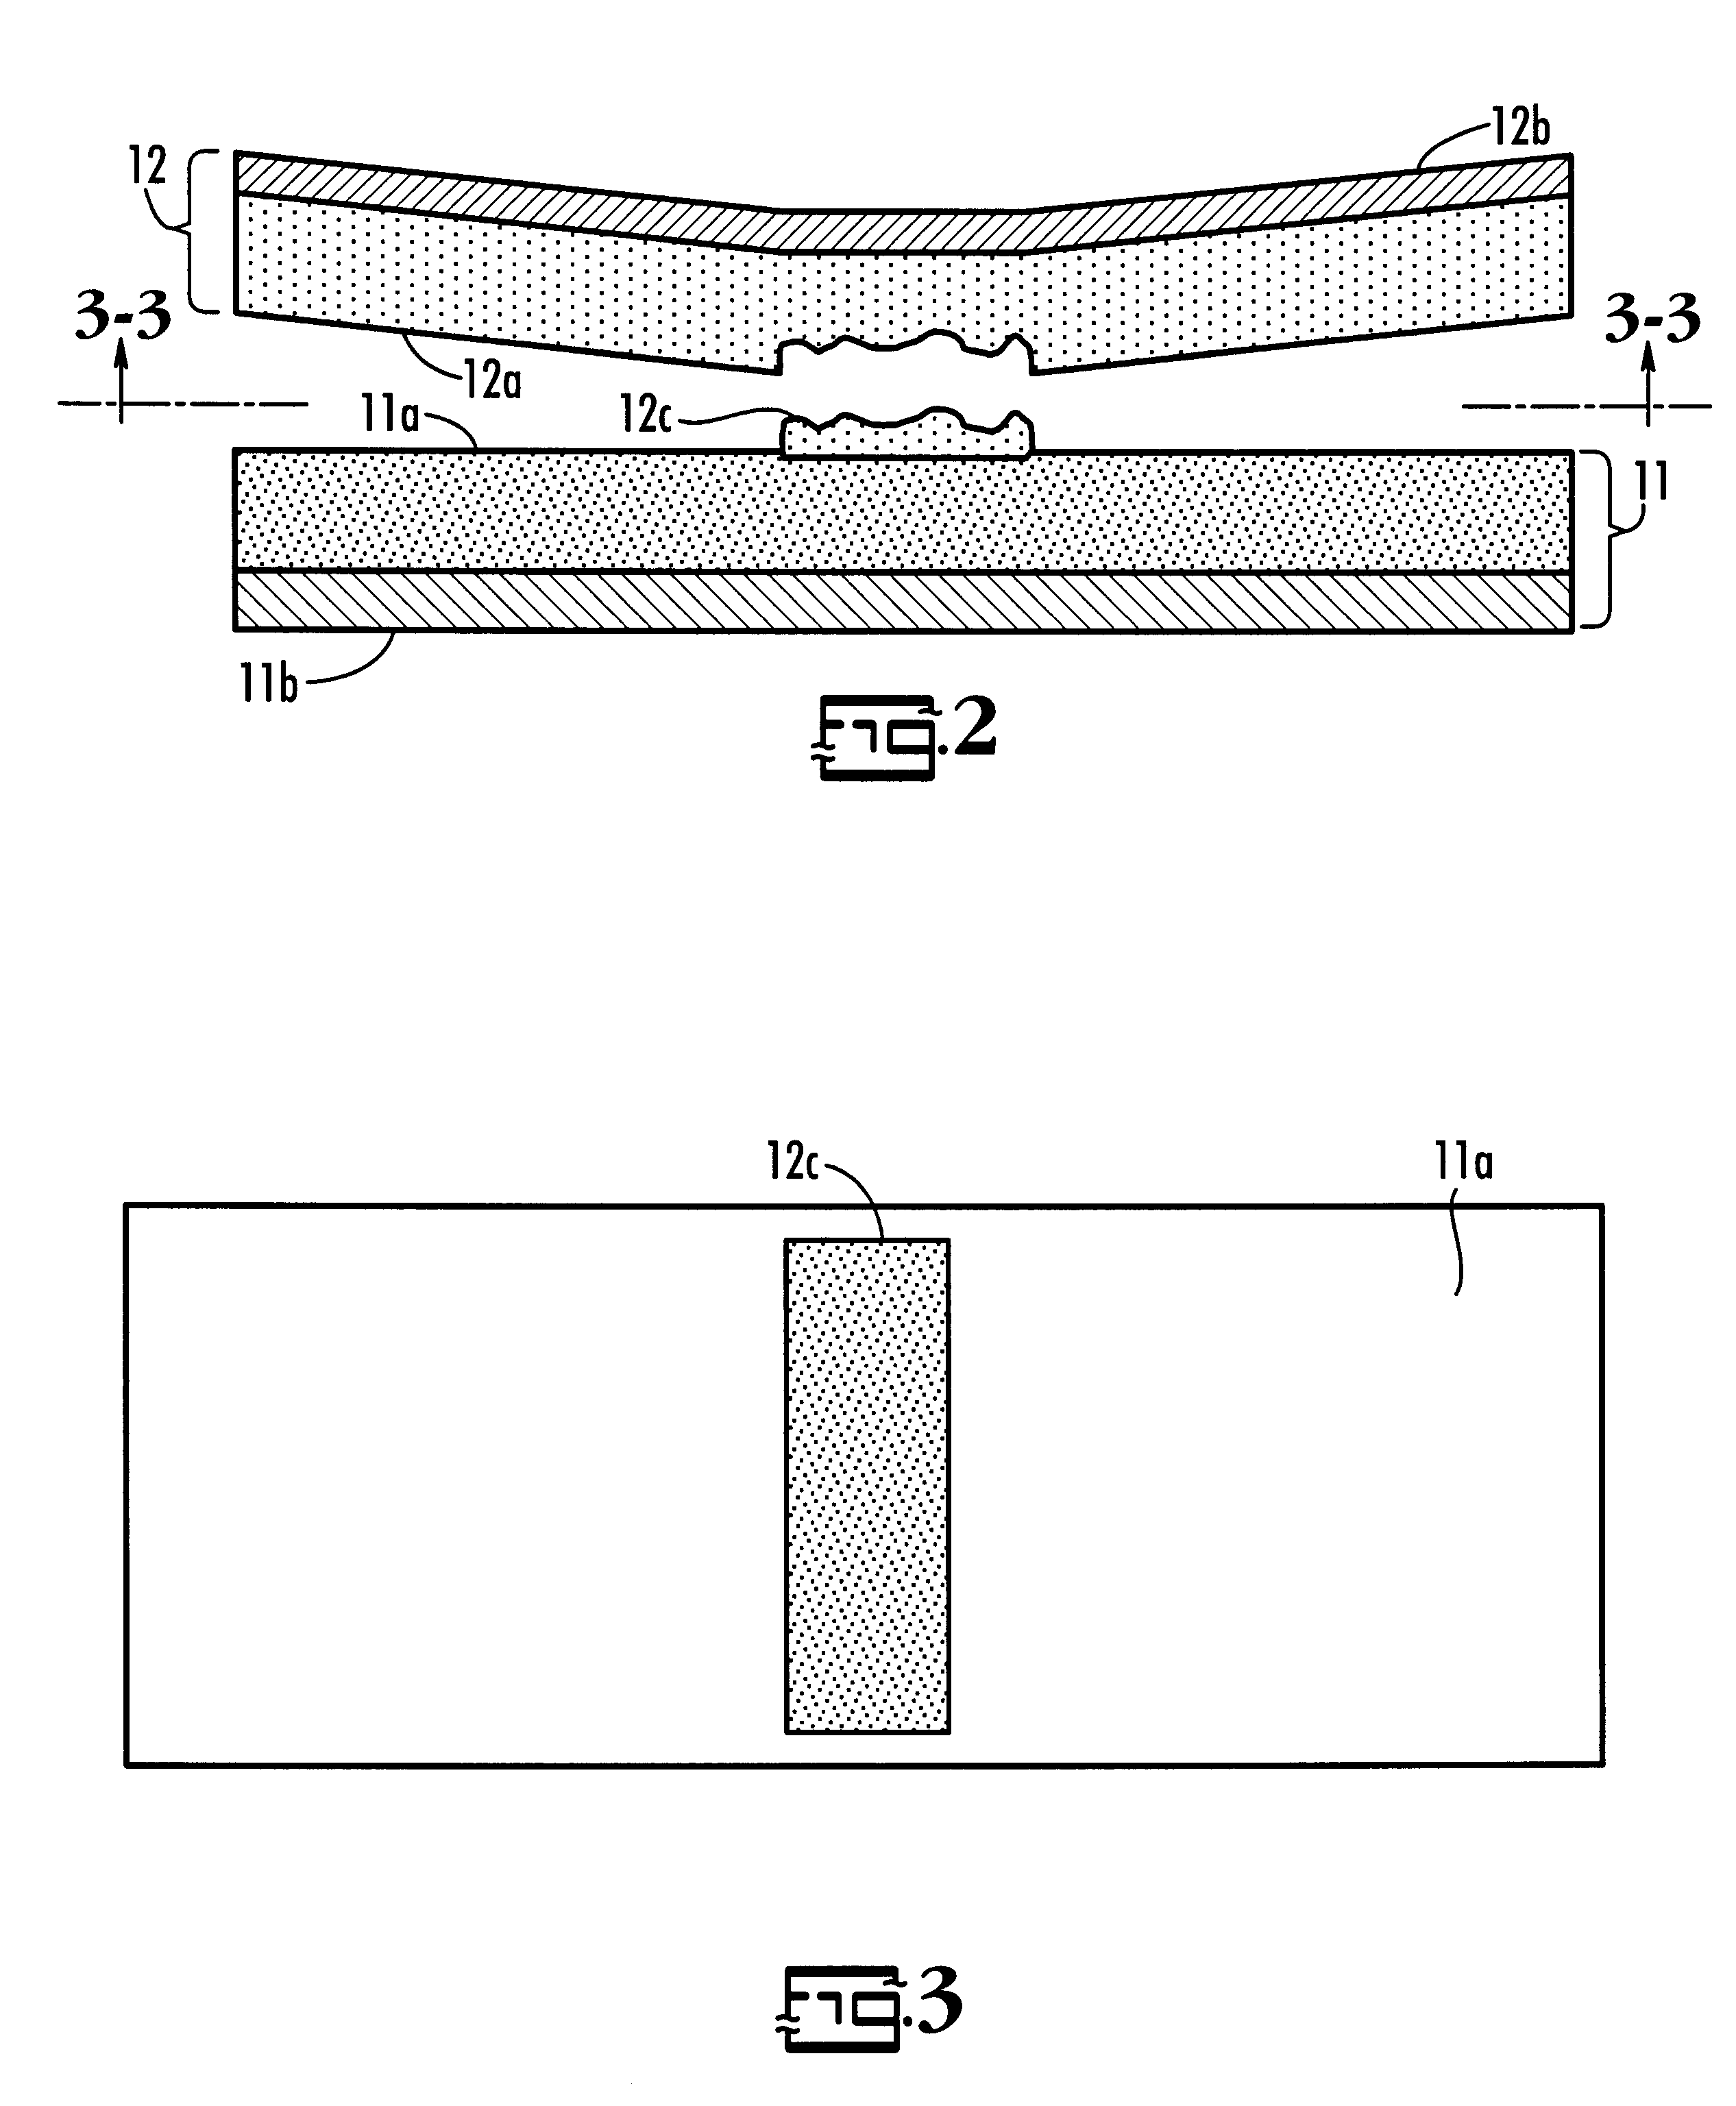 Method of producing zone specific peelable heat seals for flexible packaging applications